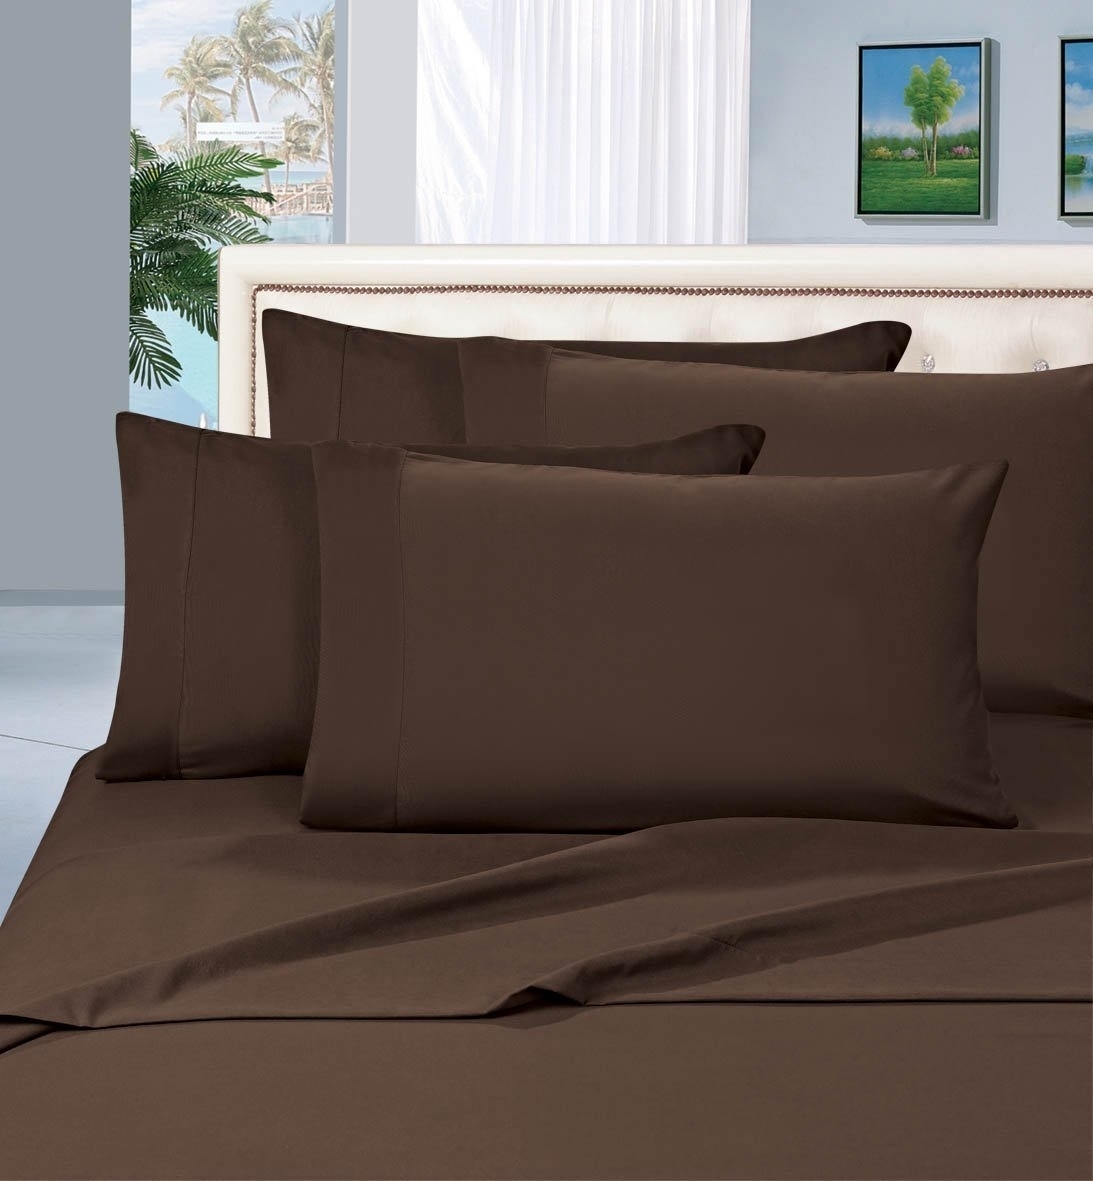 Elegant Comfort 1500 Series Wrinkle Resistant Egyptian Quality Hypoallergenic Ultra Soft Luxury 3-piece Bed Sheet Set, Twin, Chocolate